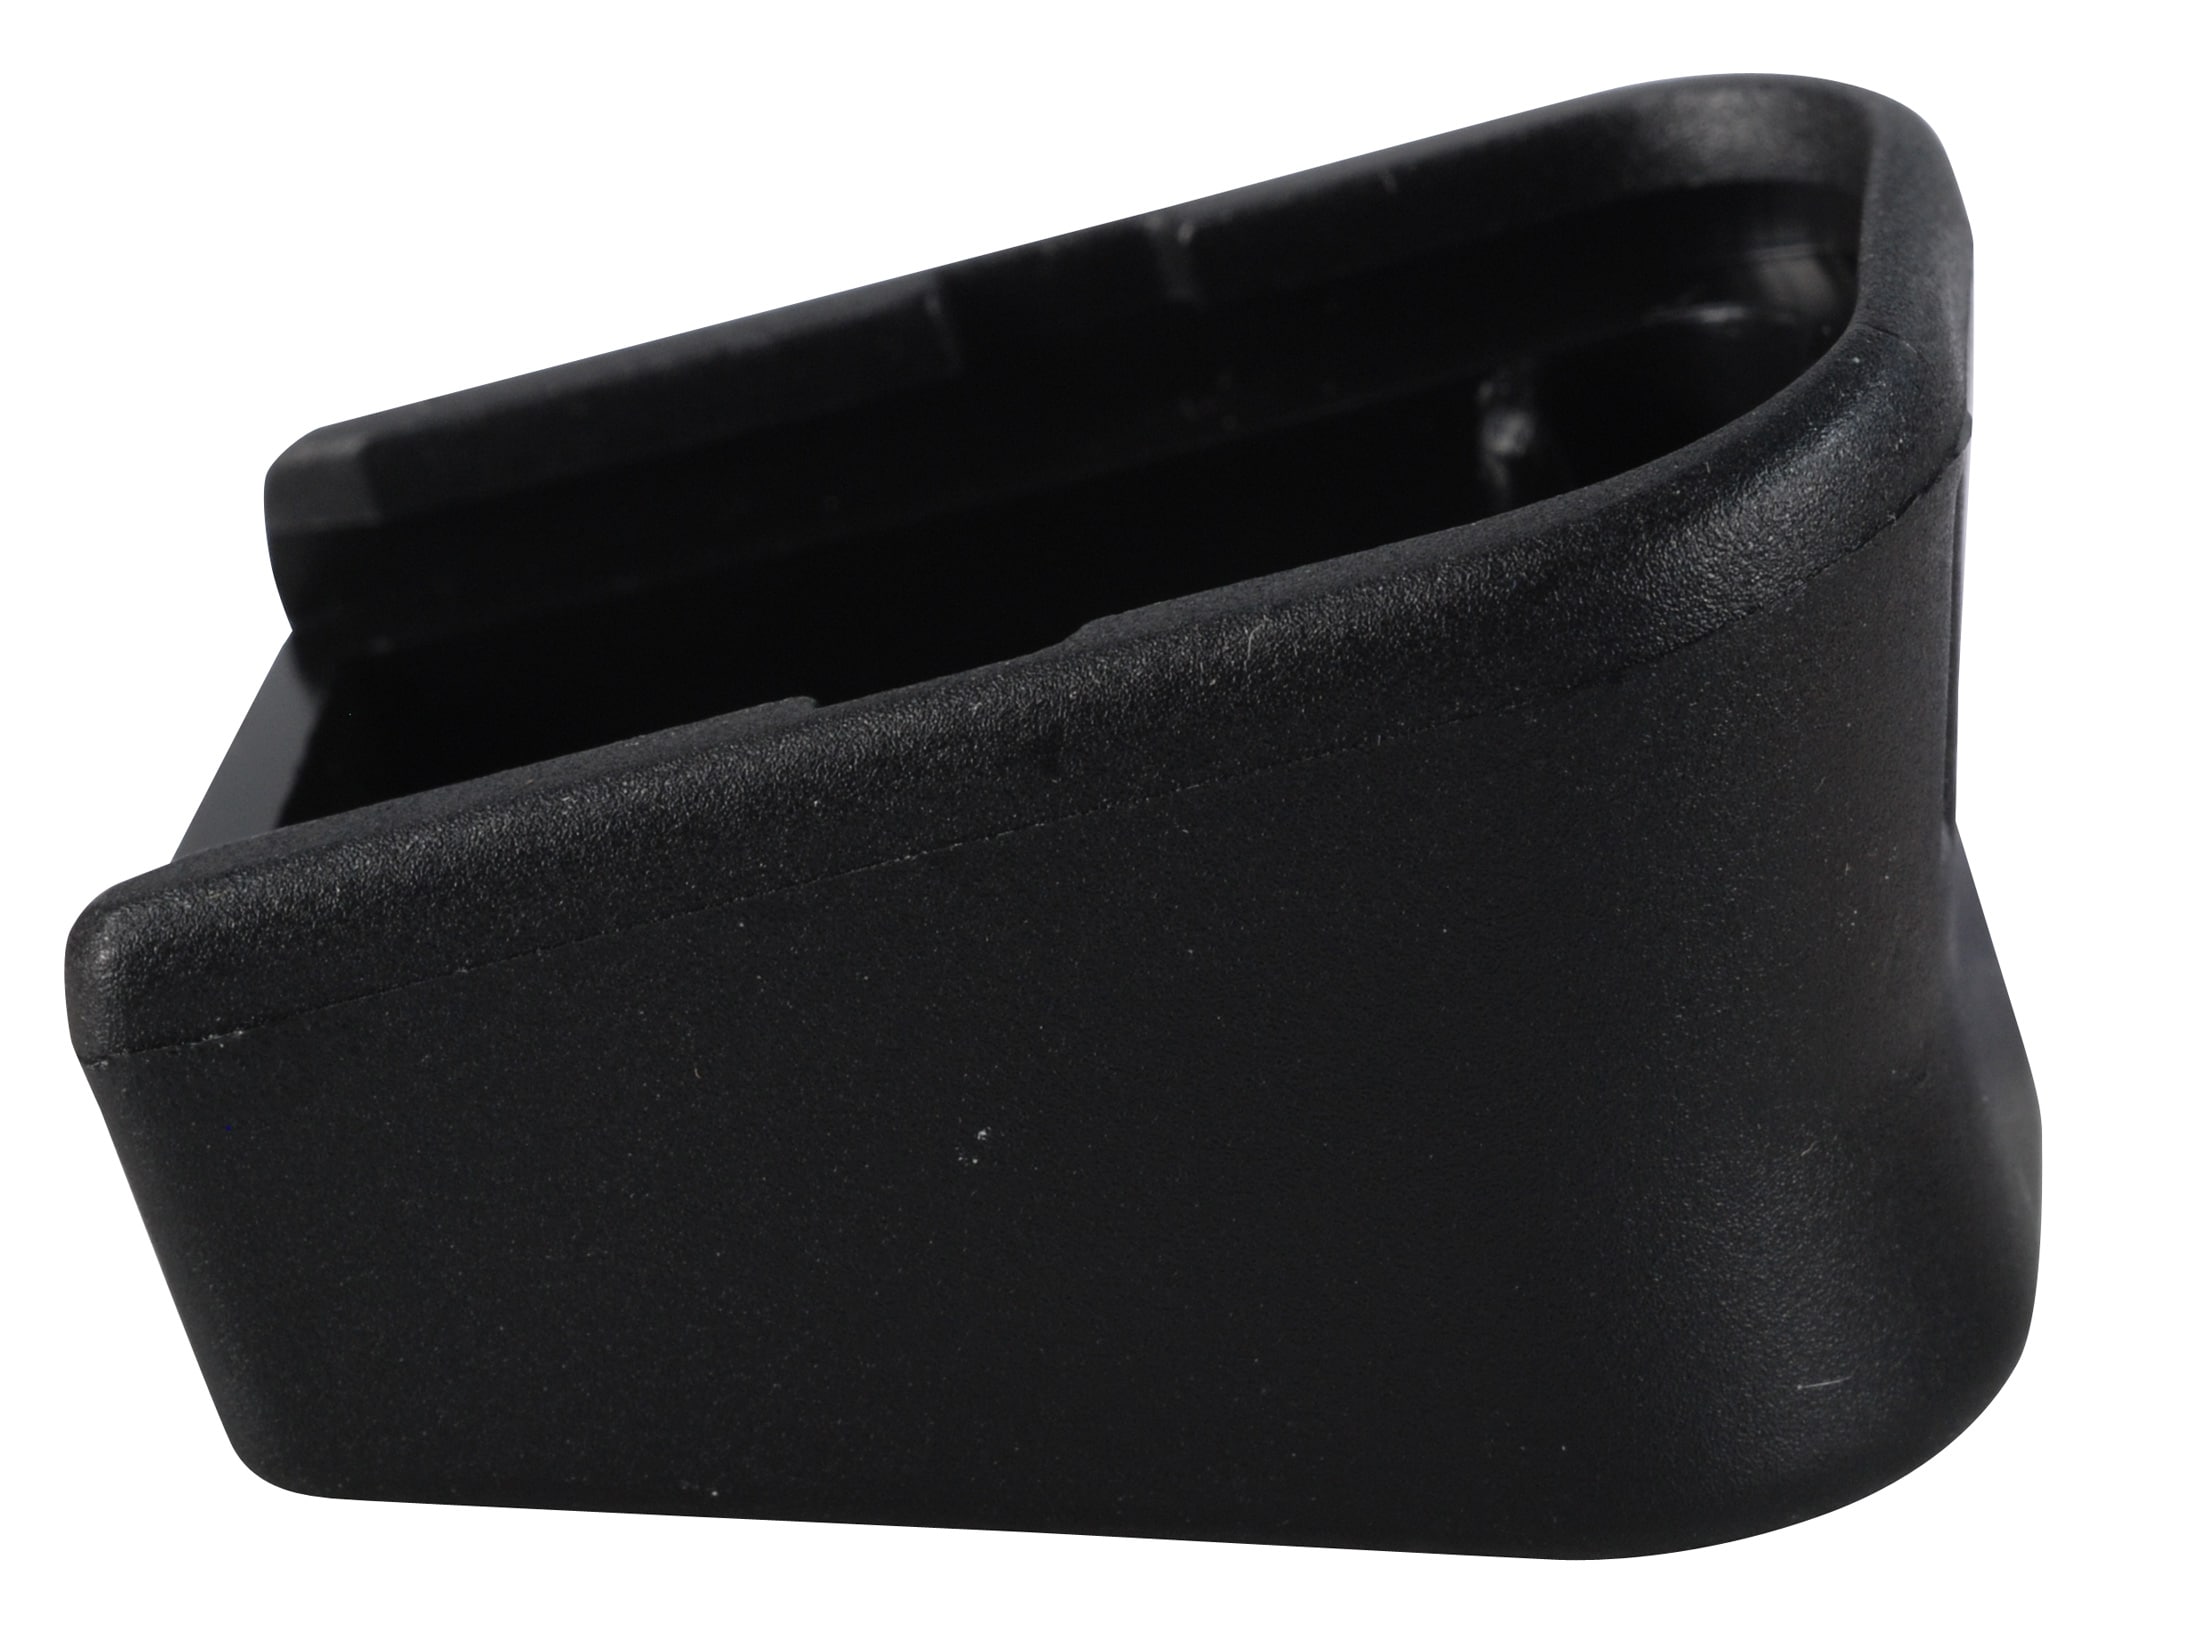 Tactical Magazine Extension Base Pad Dock FOR Glock Models 17 22 23 24 26 27 